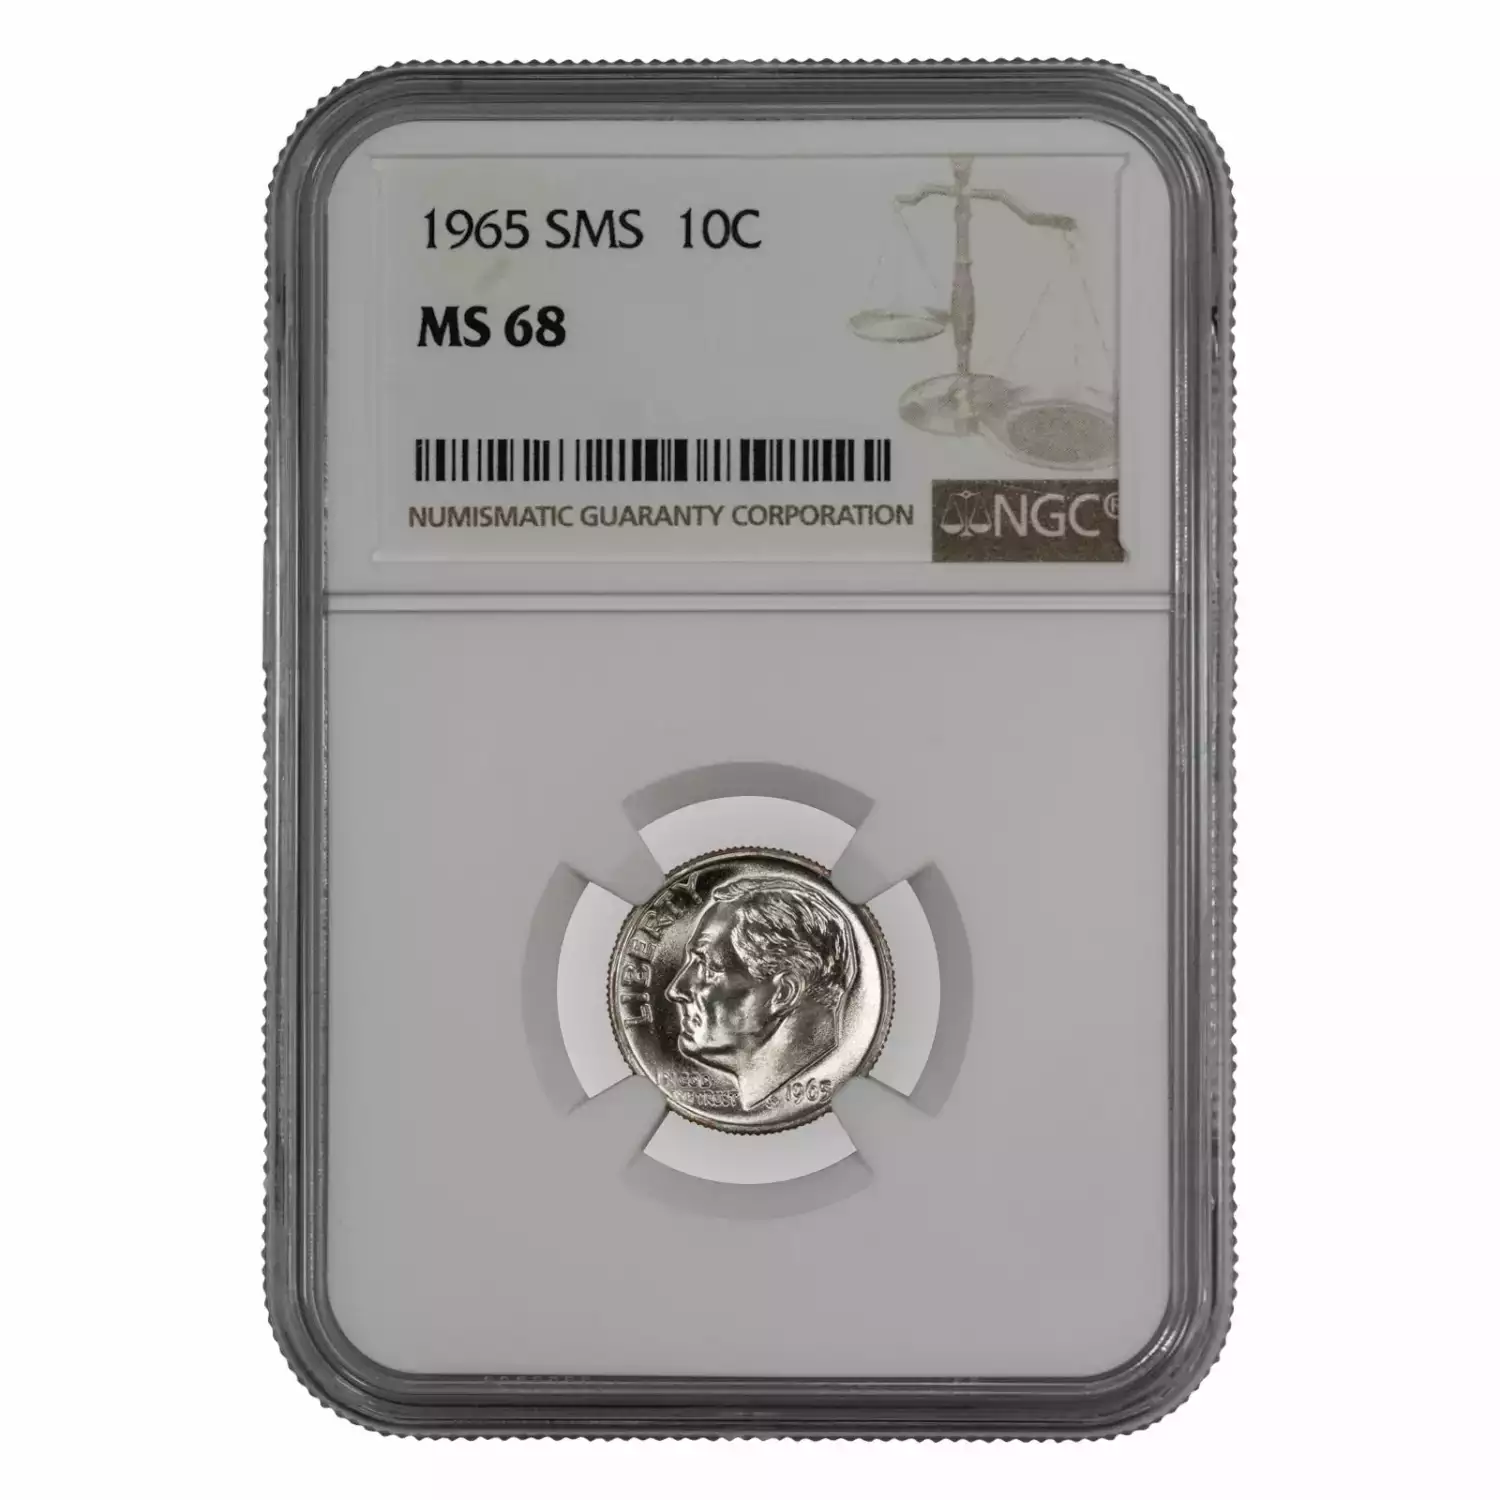 1965 SMS ROOSEVELT DIME 10C NGC CERTIFIED MS 68